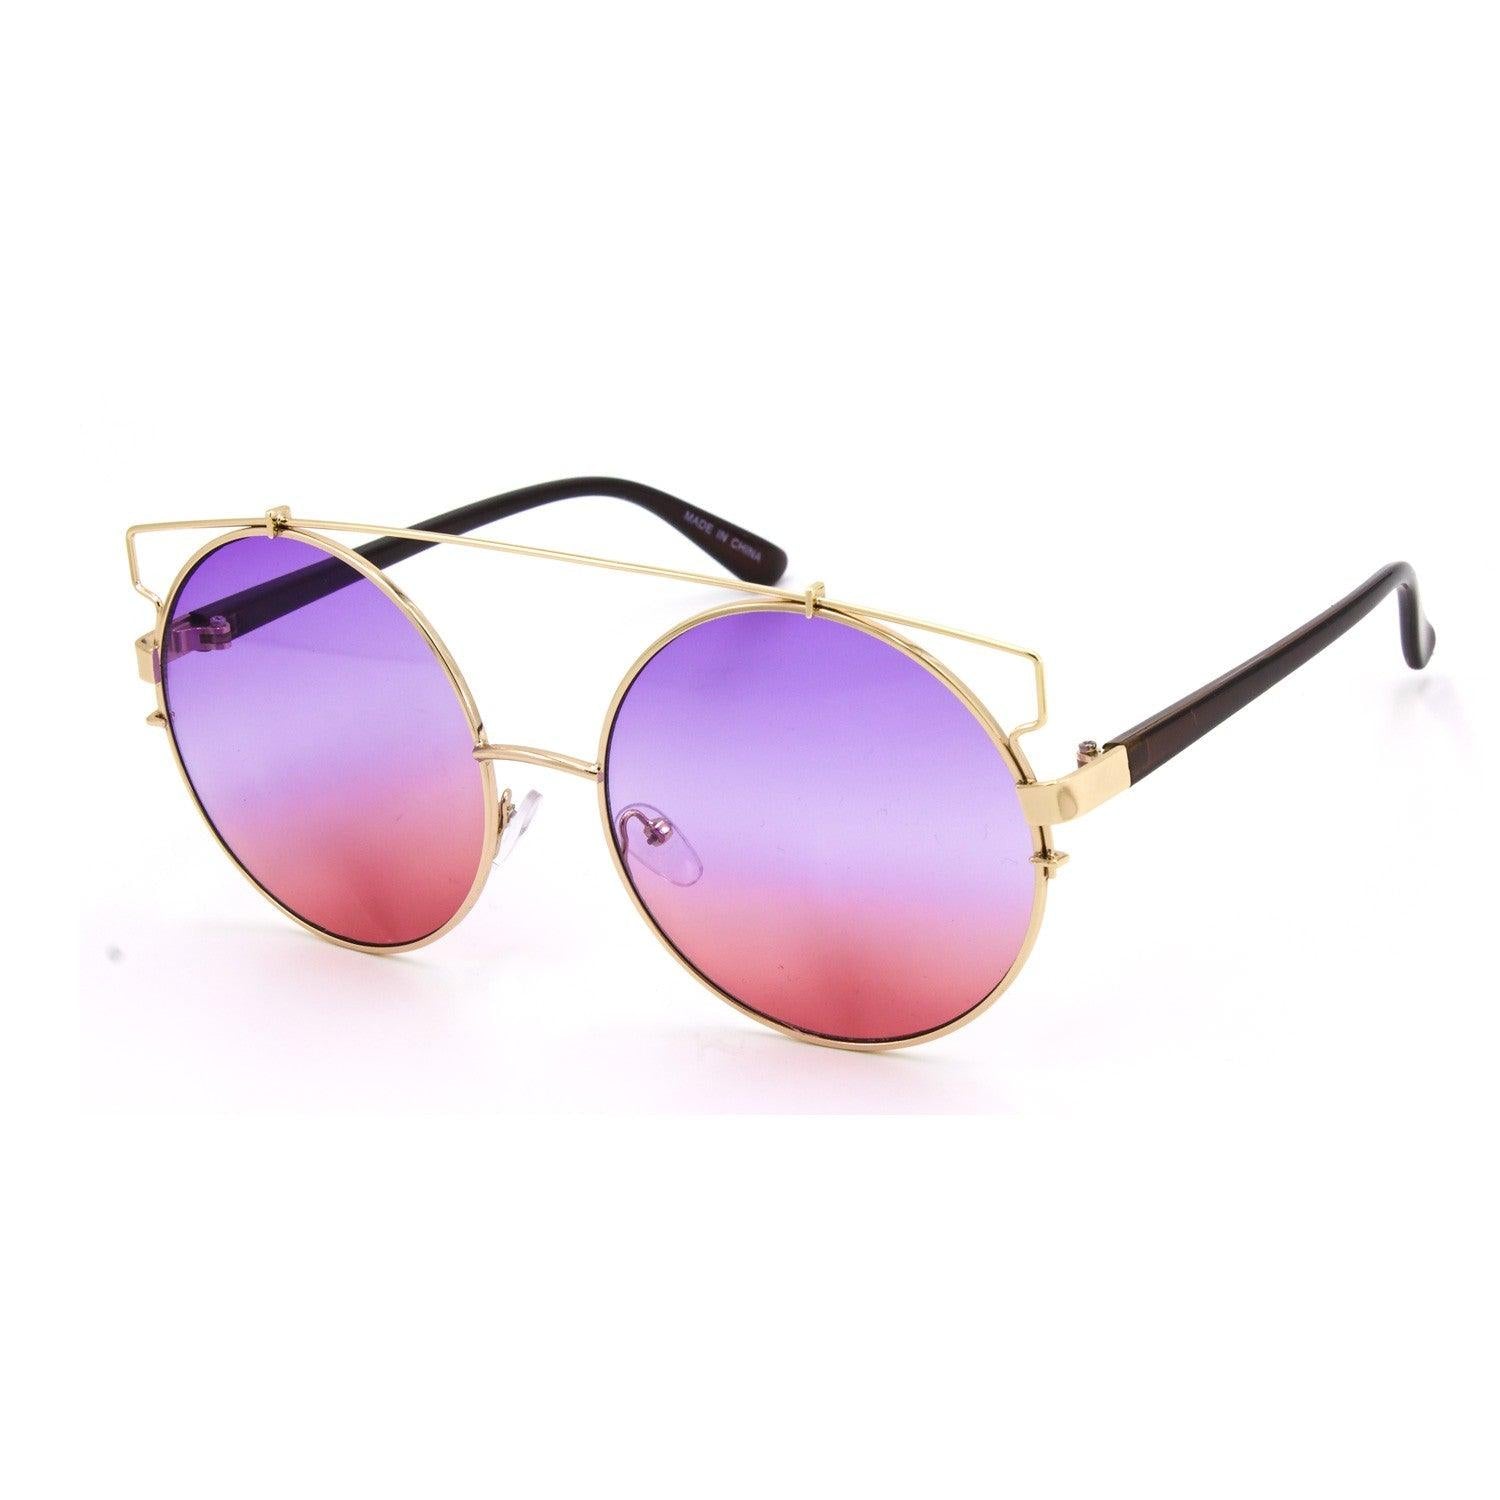 Fashion Round Sunglasses with Metal Bar - Weekend Shade Sunglasses